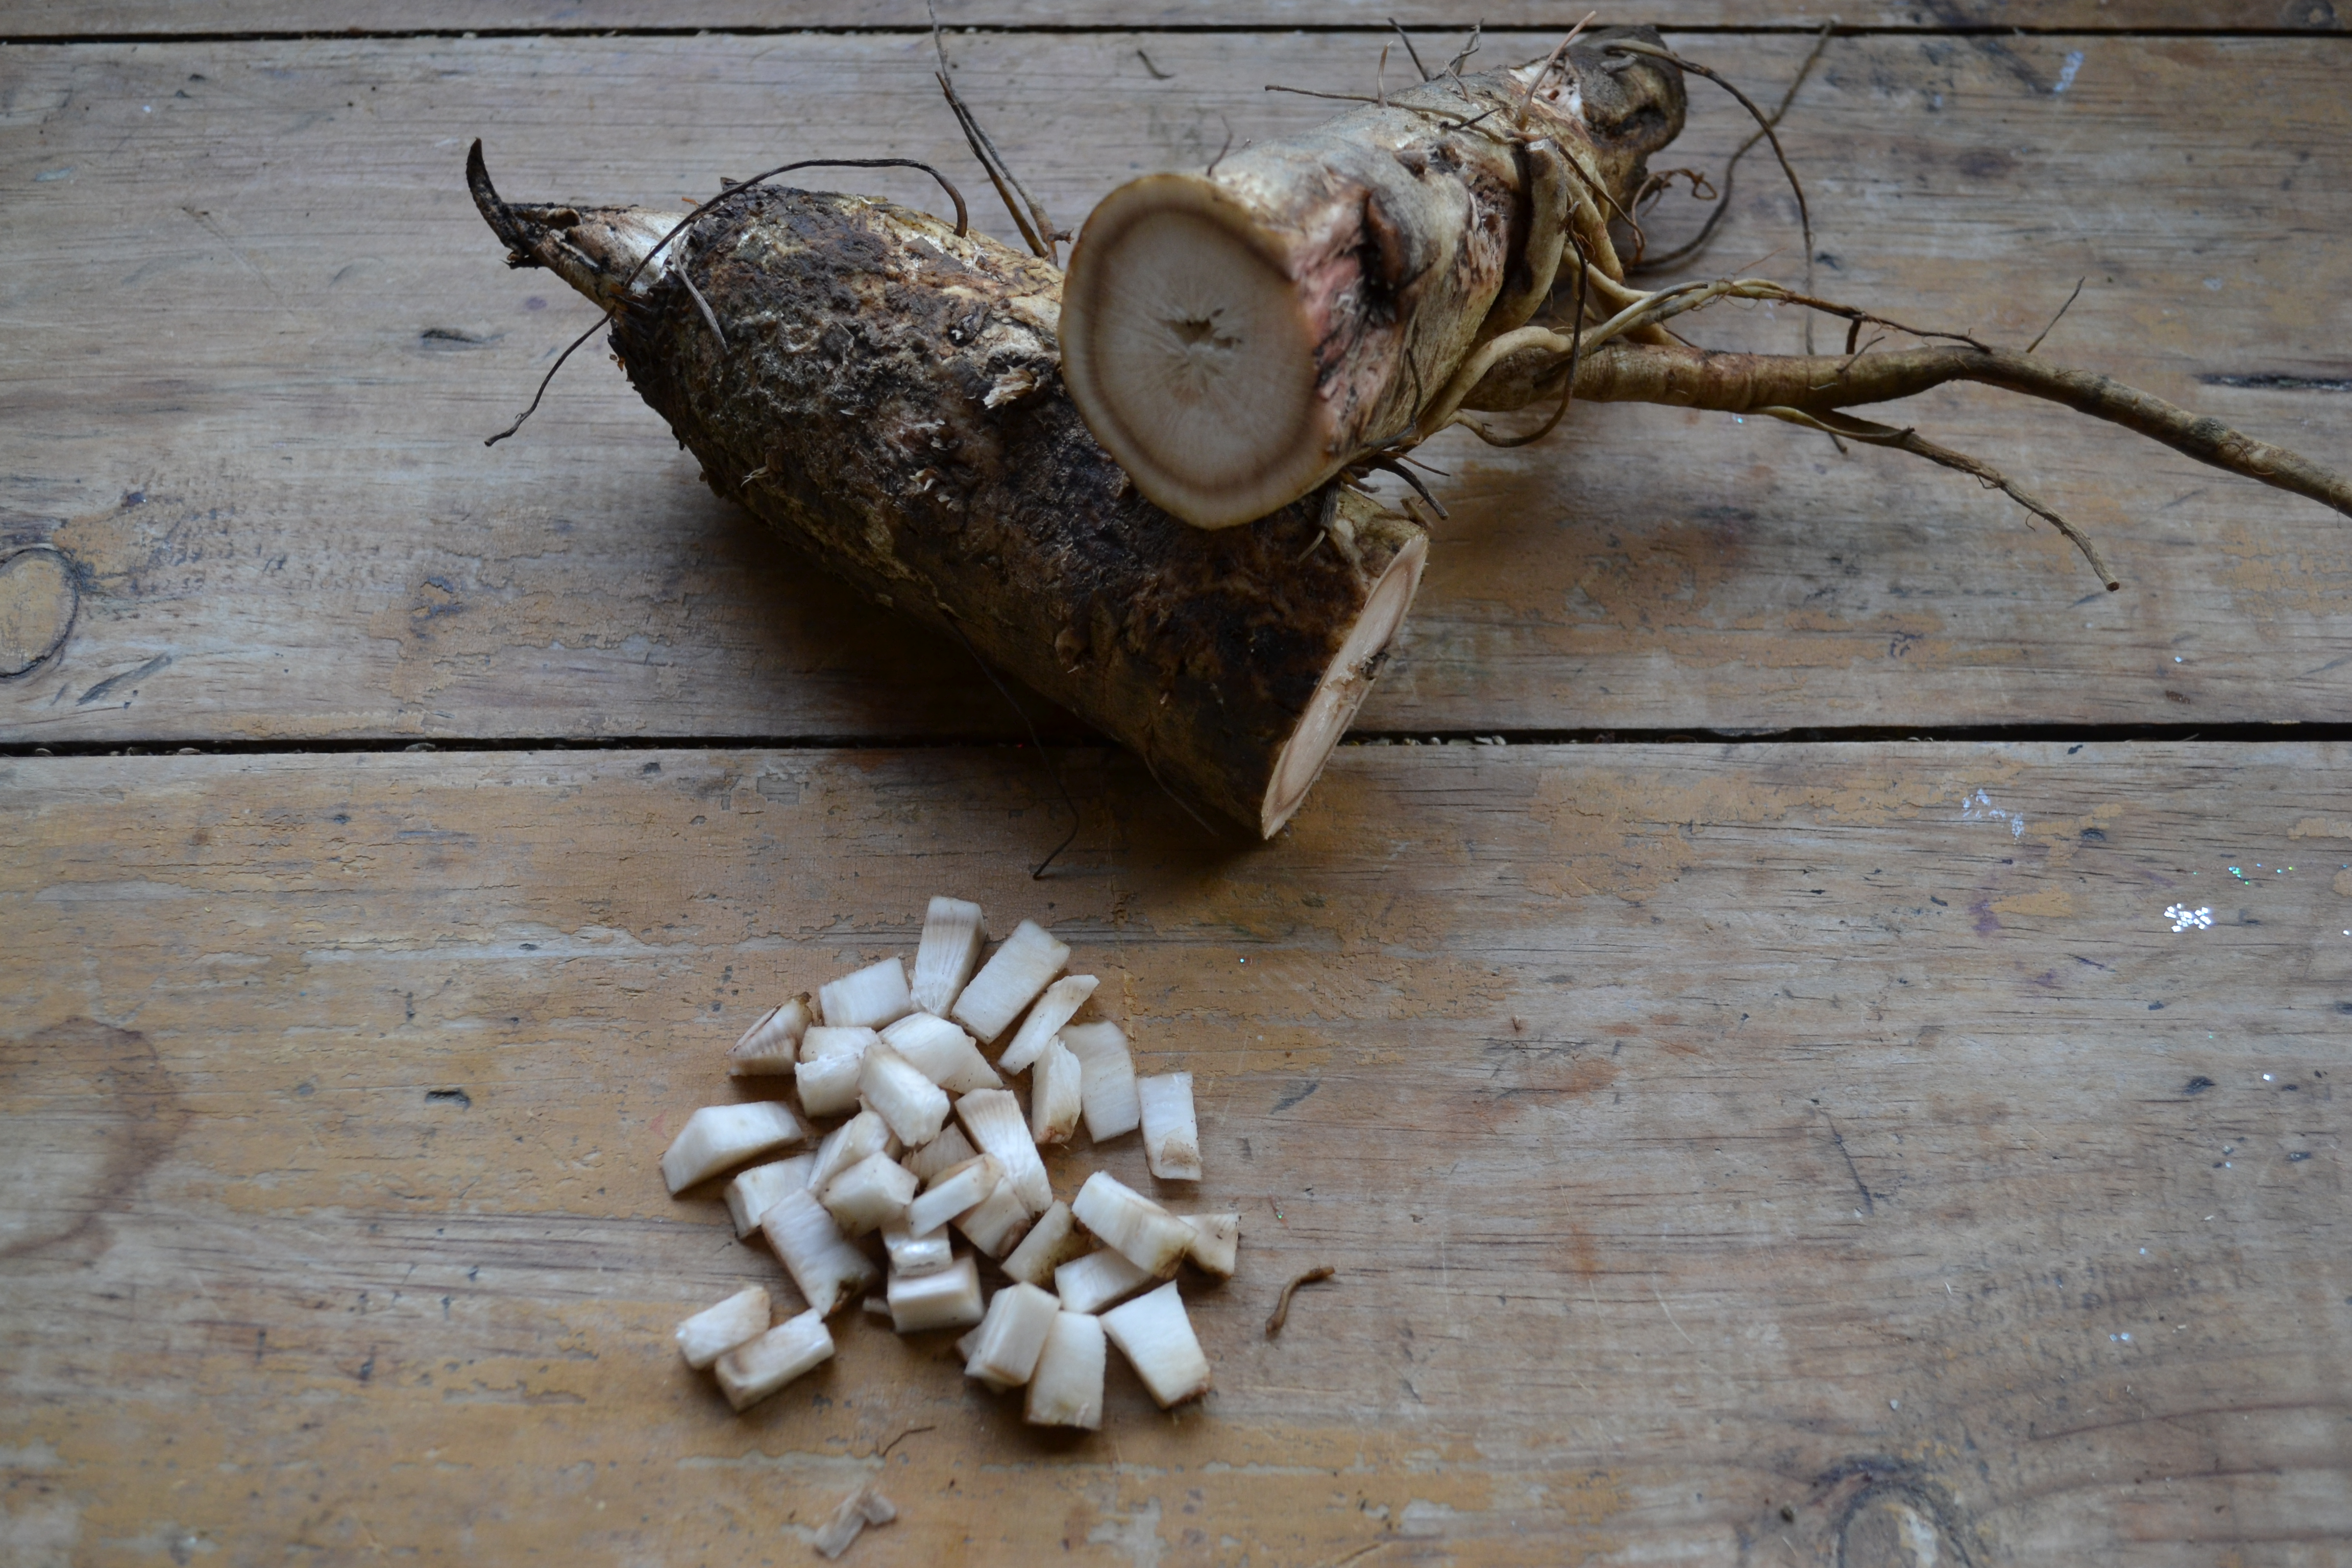 How To Make Pickled Burdock Root | Herbal Academy | Here's a simple recipe for pickled burdock root. By following this recipe, you can preserve some of burdock's beneficial properties to enjoy as a yummy snack year-round.